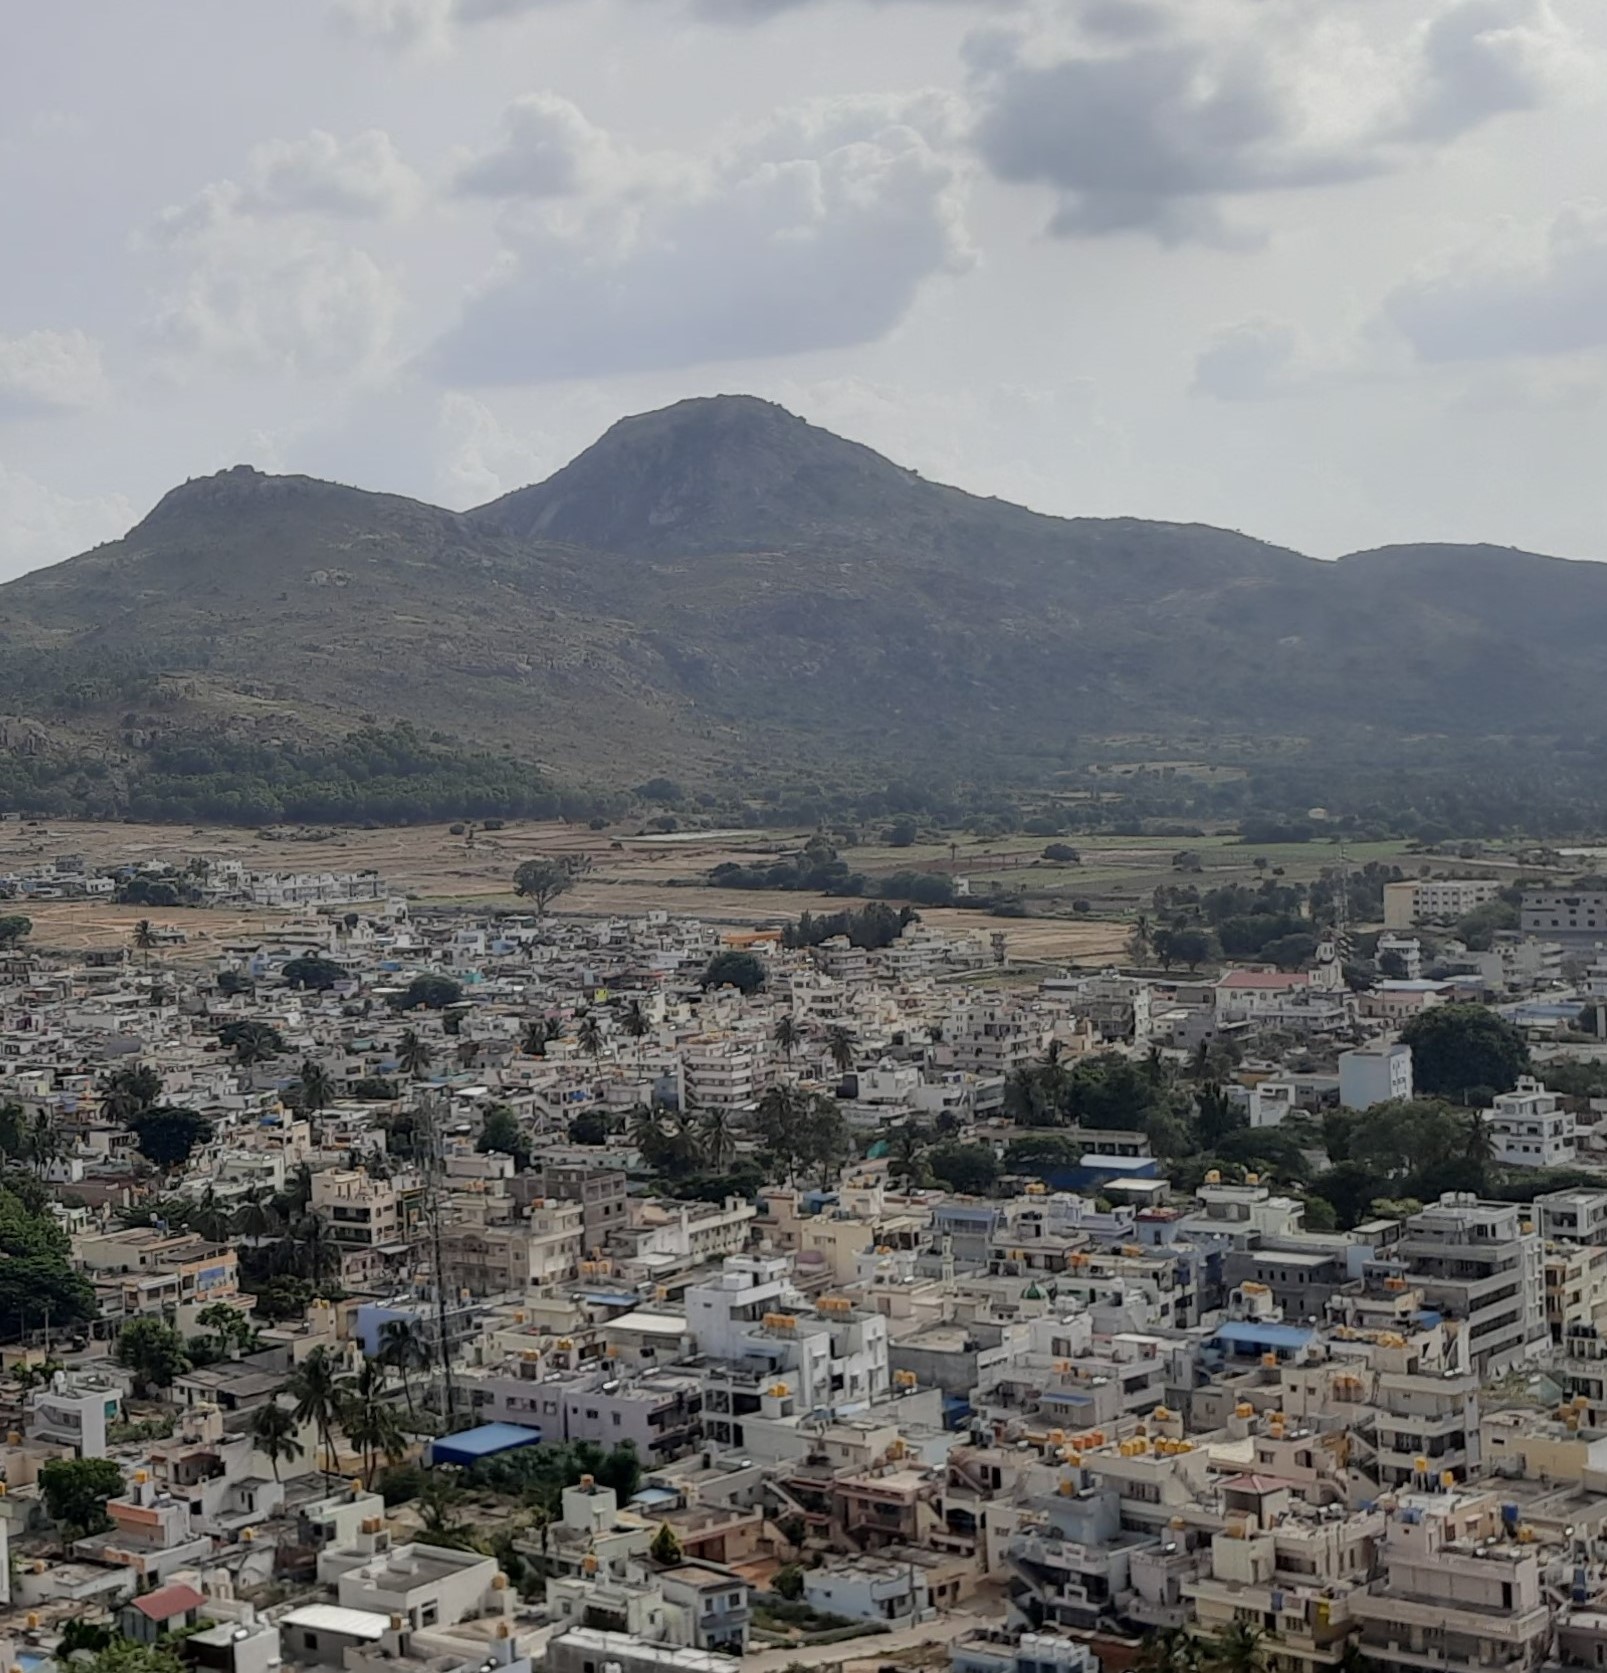 A panoramic view of Chintamani town